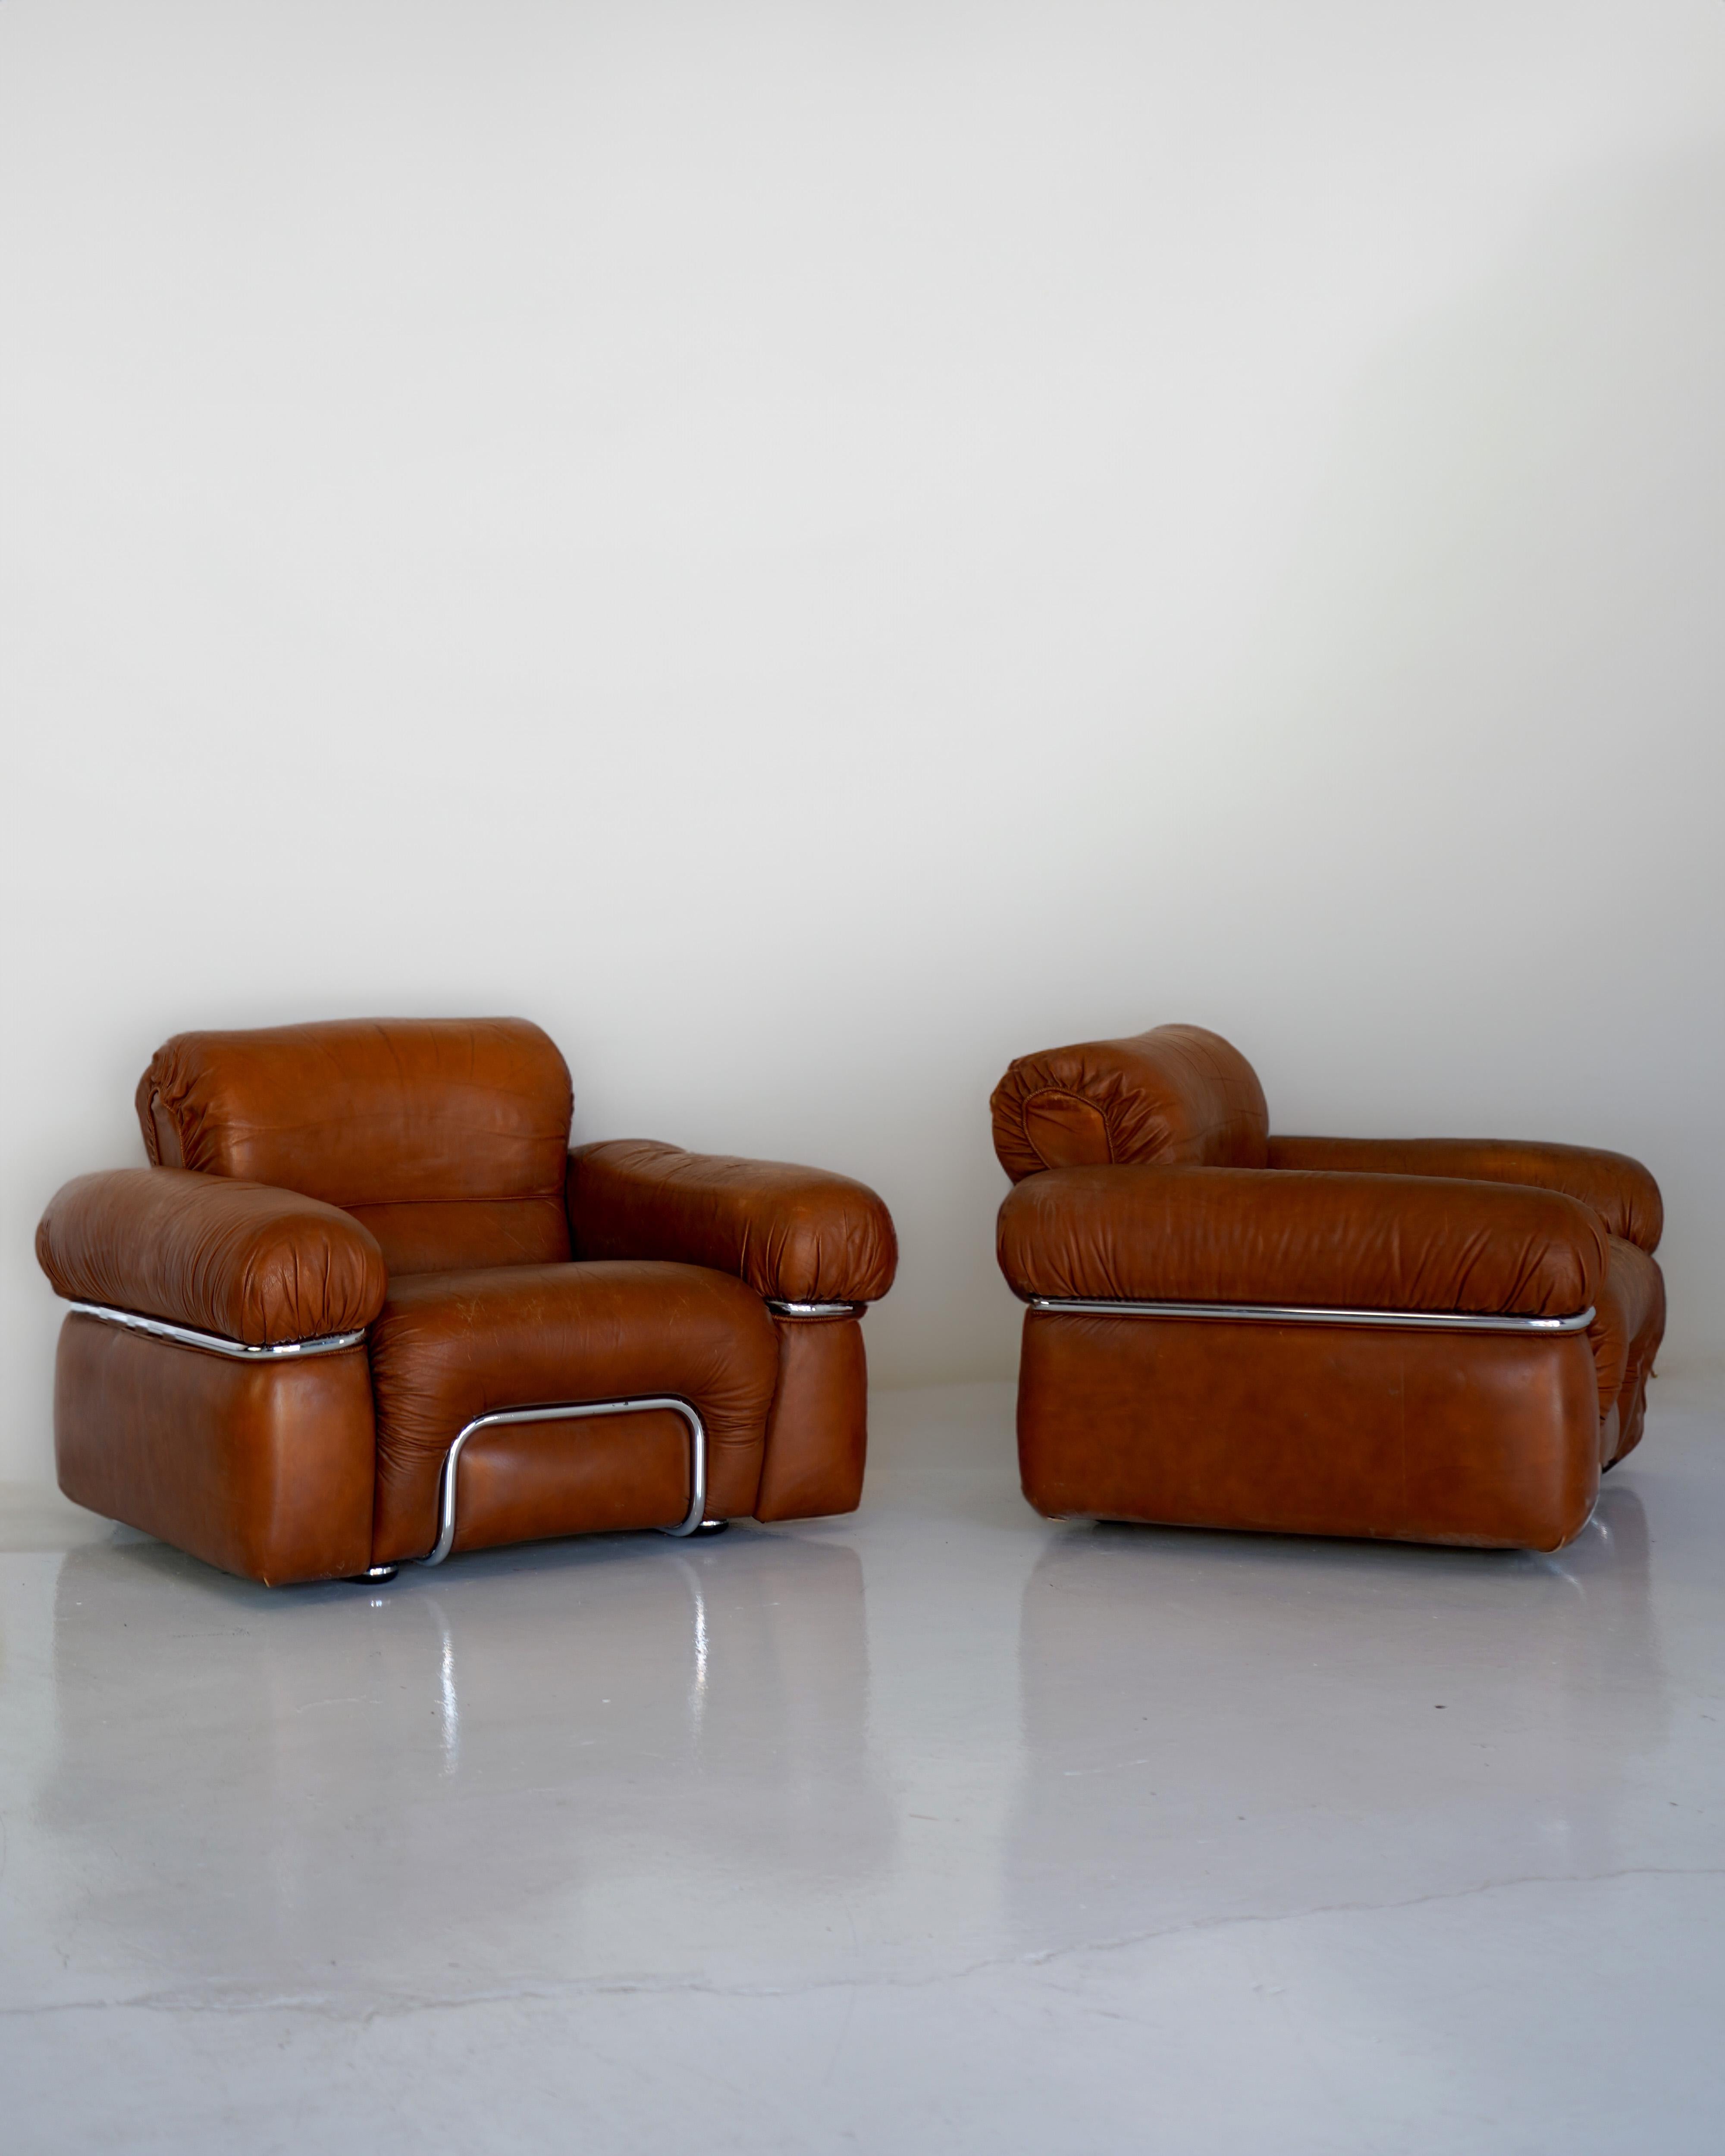 Chunky curves enveloped in cognac Italian leather and wrapped in chrome. These Adriano Piazzesi attributed armchairs epitomize the allure of 1970s Italian design.

In good condition. Sold as a pair.